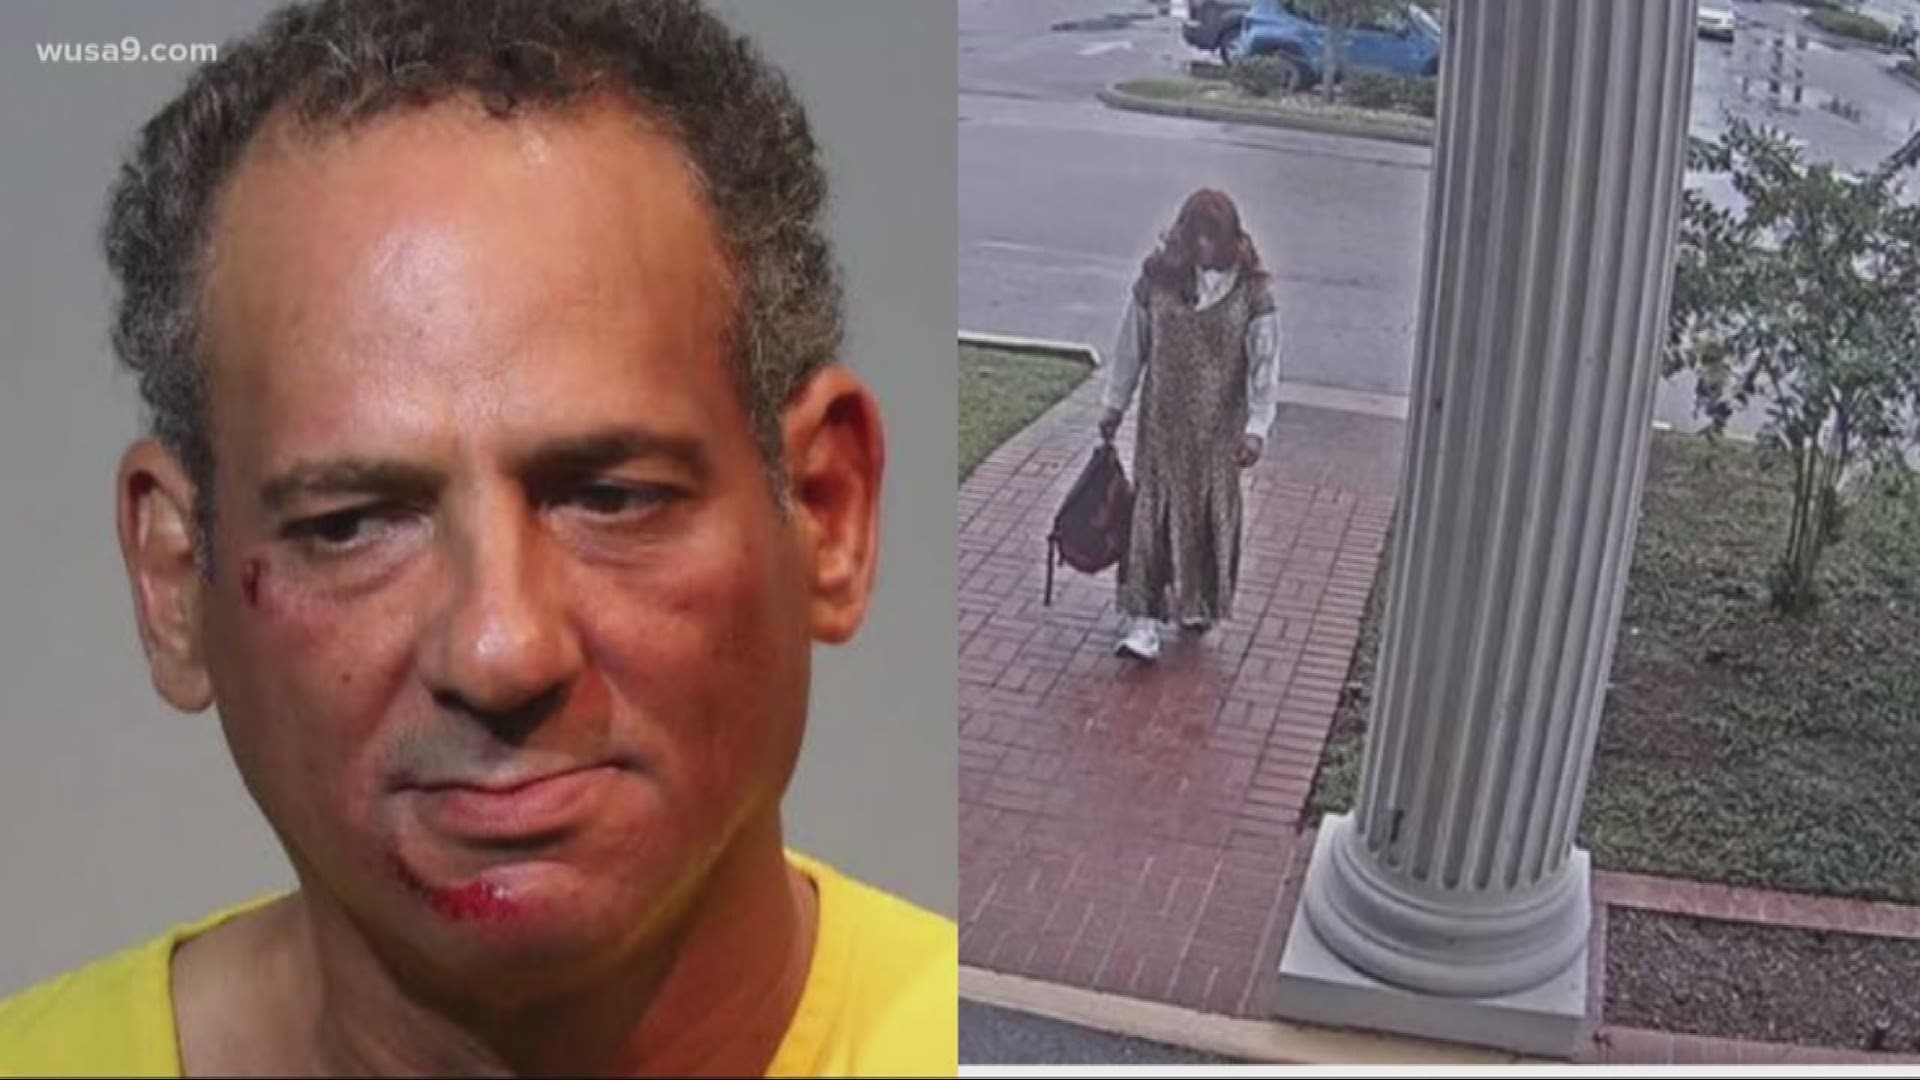 A FL man disguised as a woman attempted to rob a bank and allegedly took off in a police cruiser. In Other News, with stories that may not be on your radar.